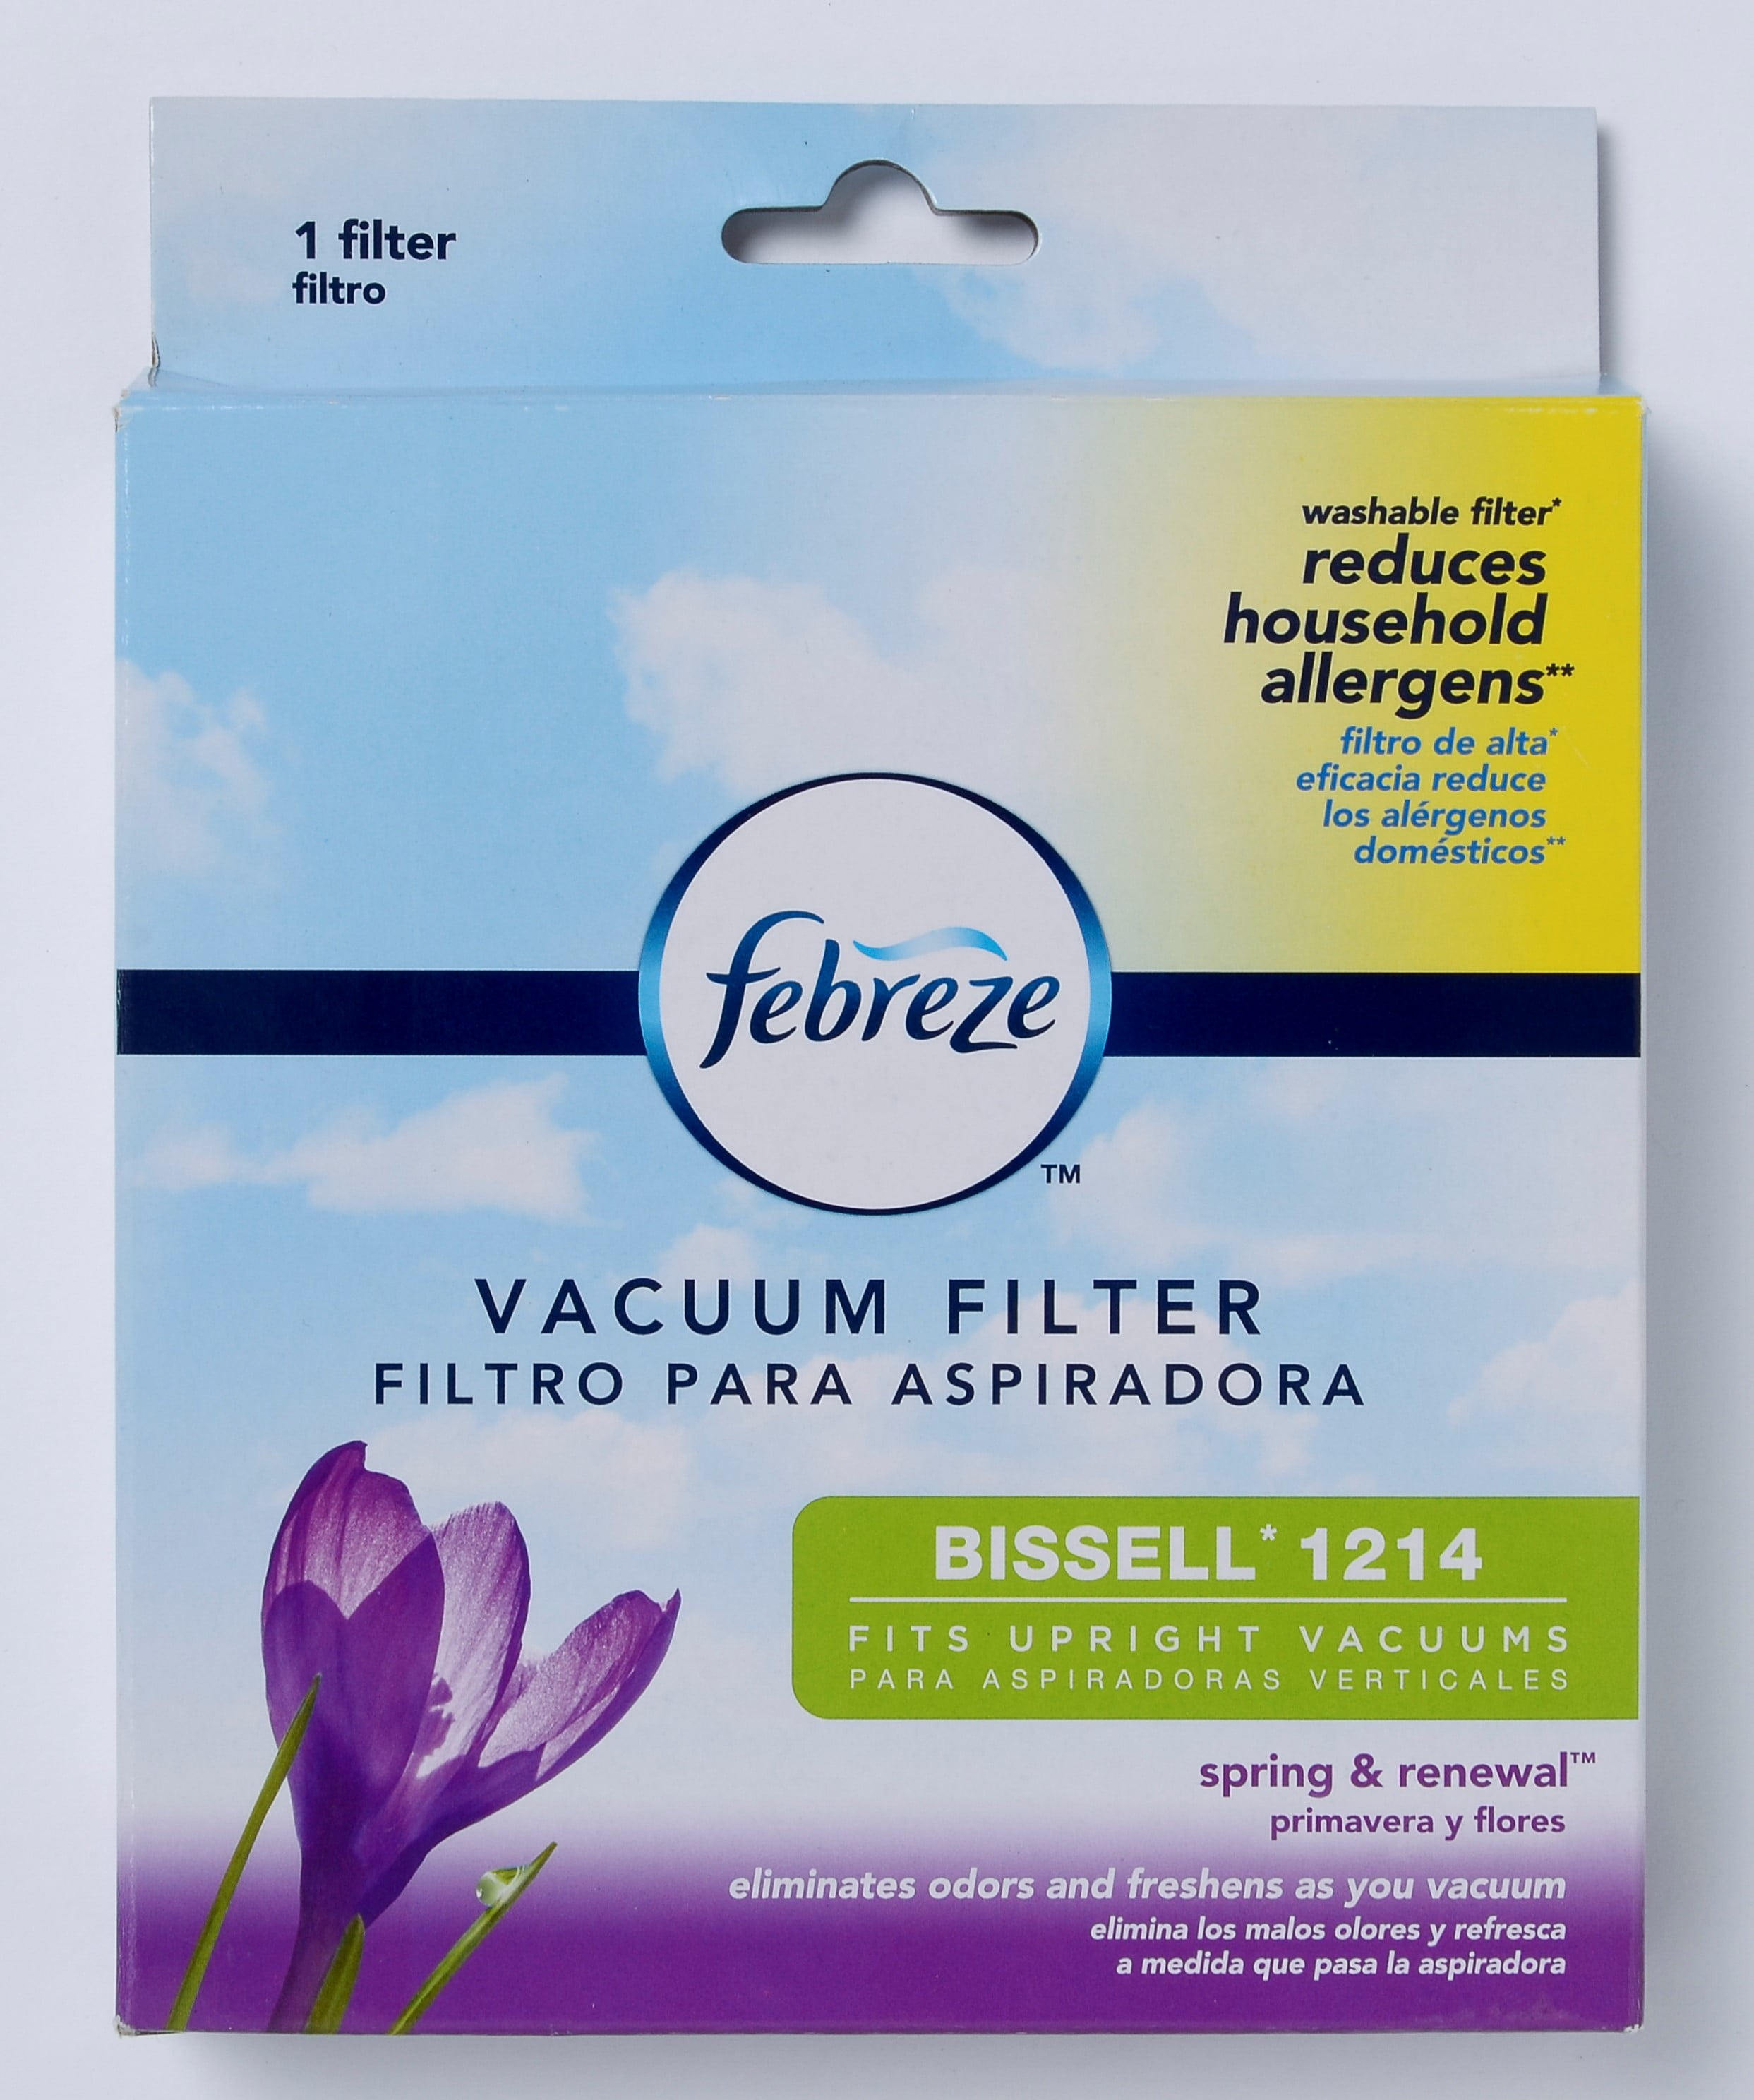 Details about   New Febreze Spring & Renewal Vacuum Filter Bissell Style 12 ~ Reduces Allergens 